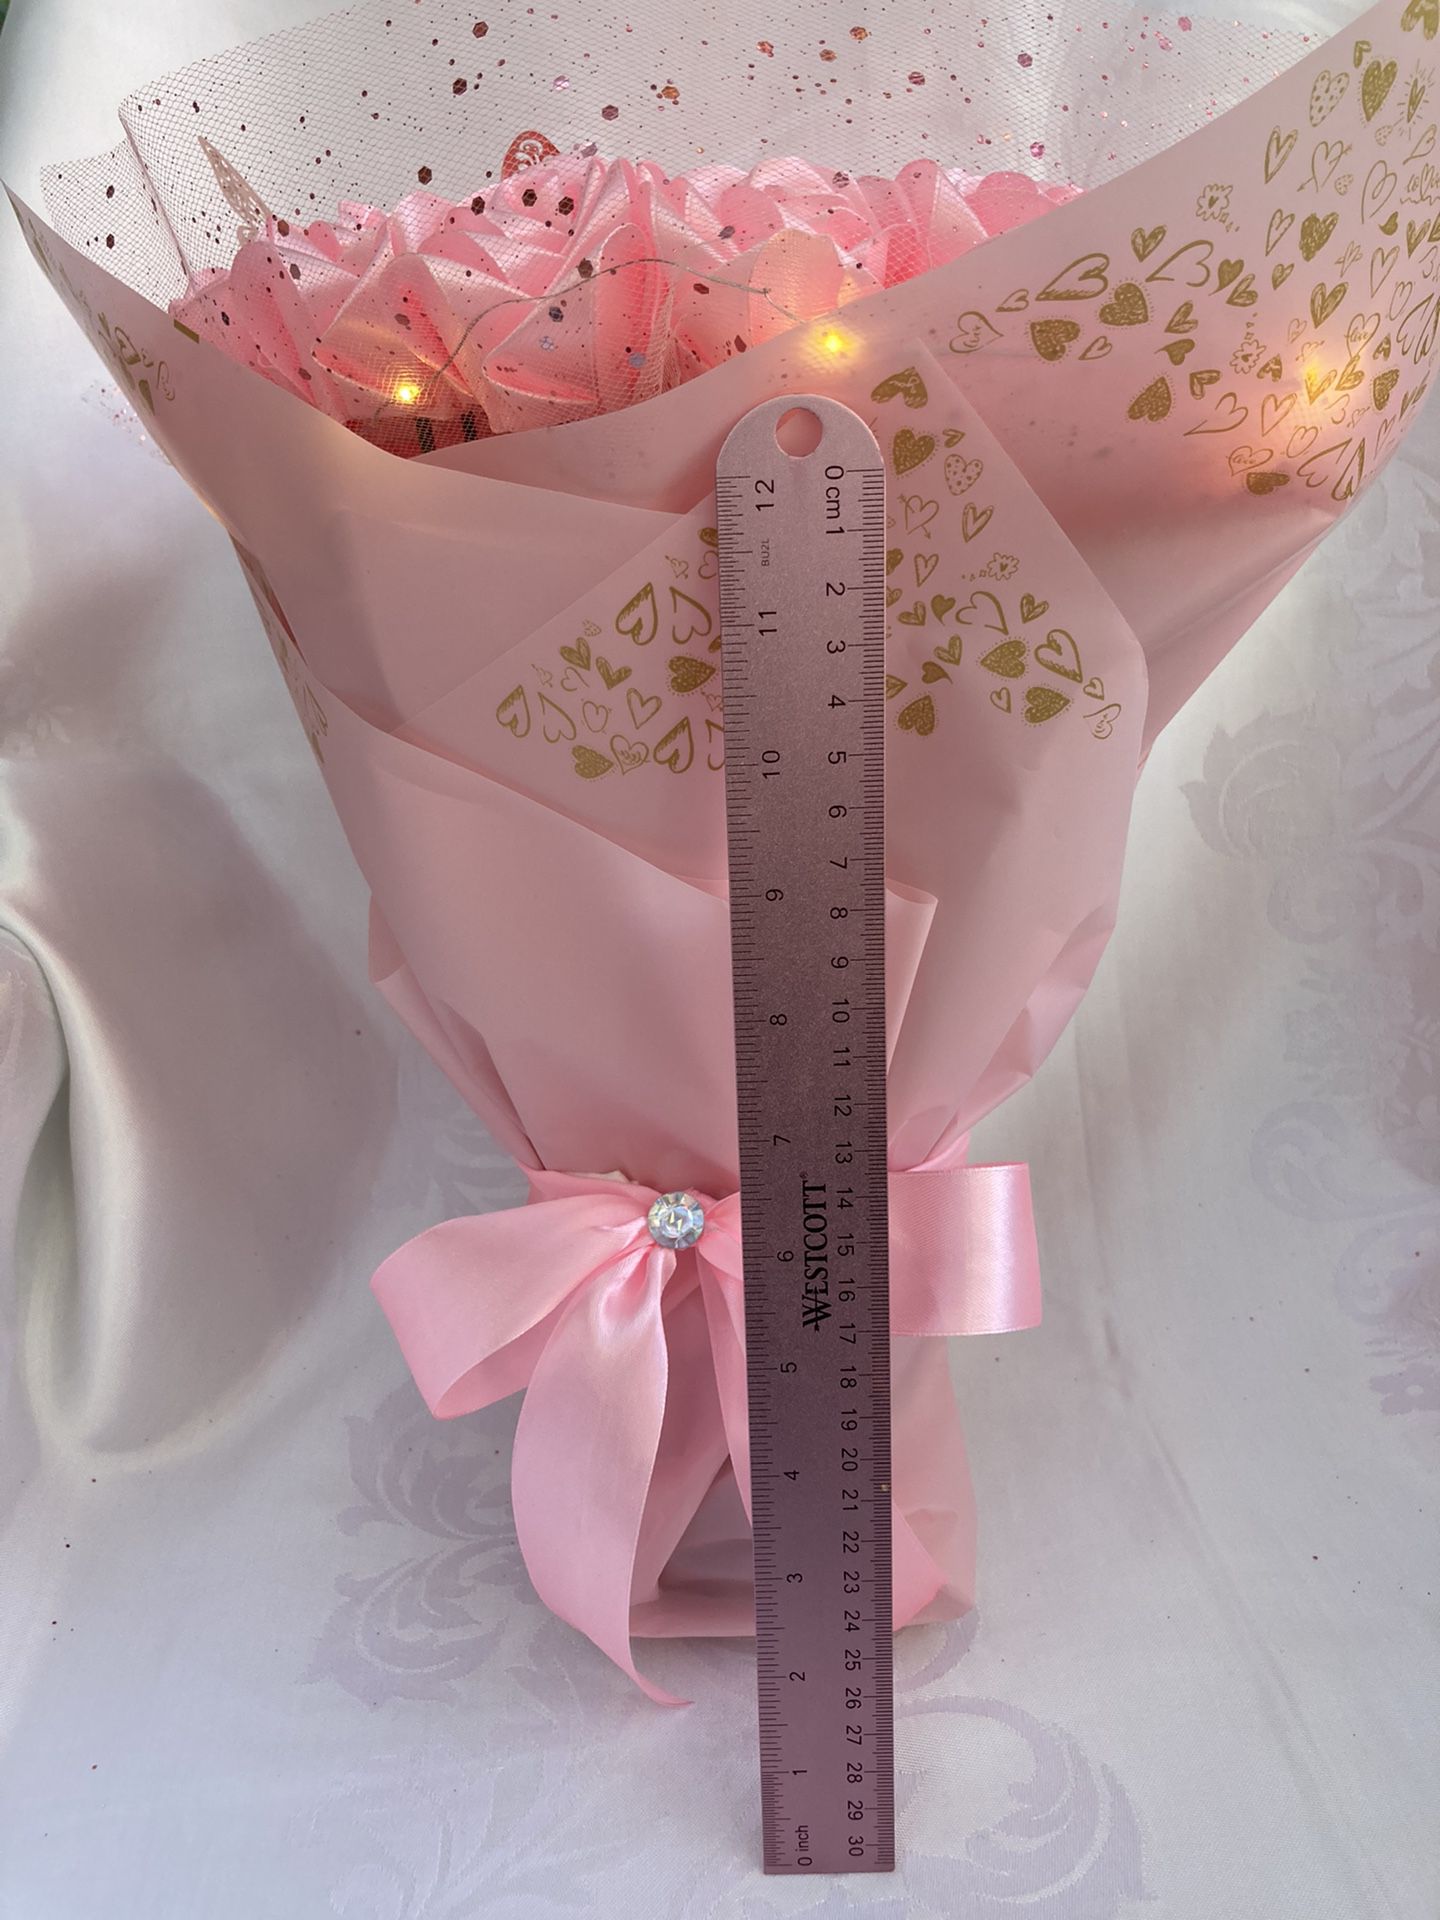 Personalized Ribbon and Ramo Buchon in Pink in Bedford, TX